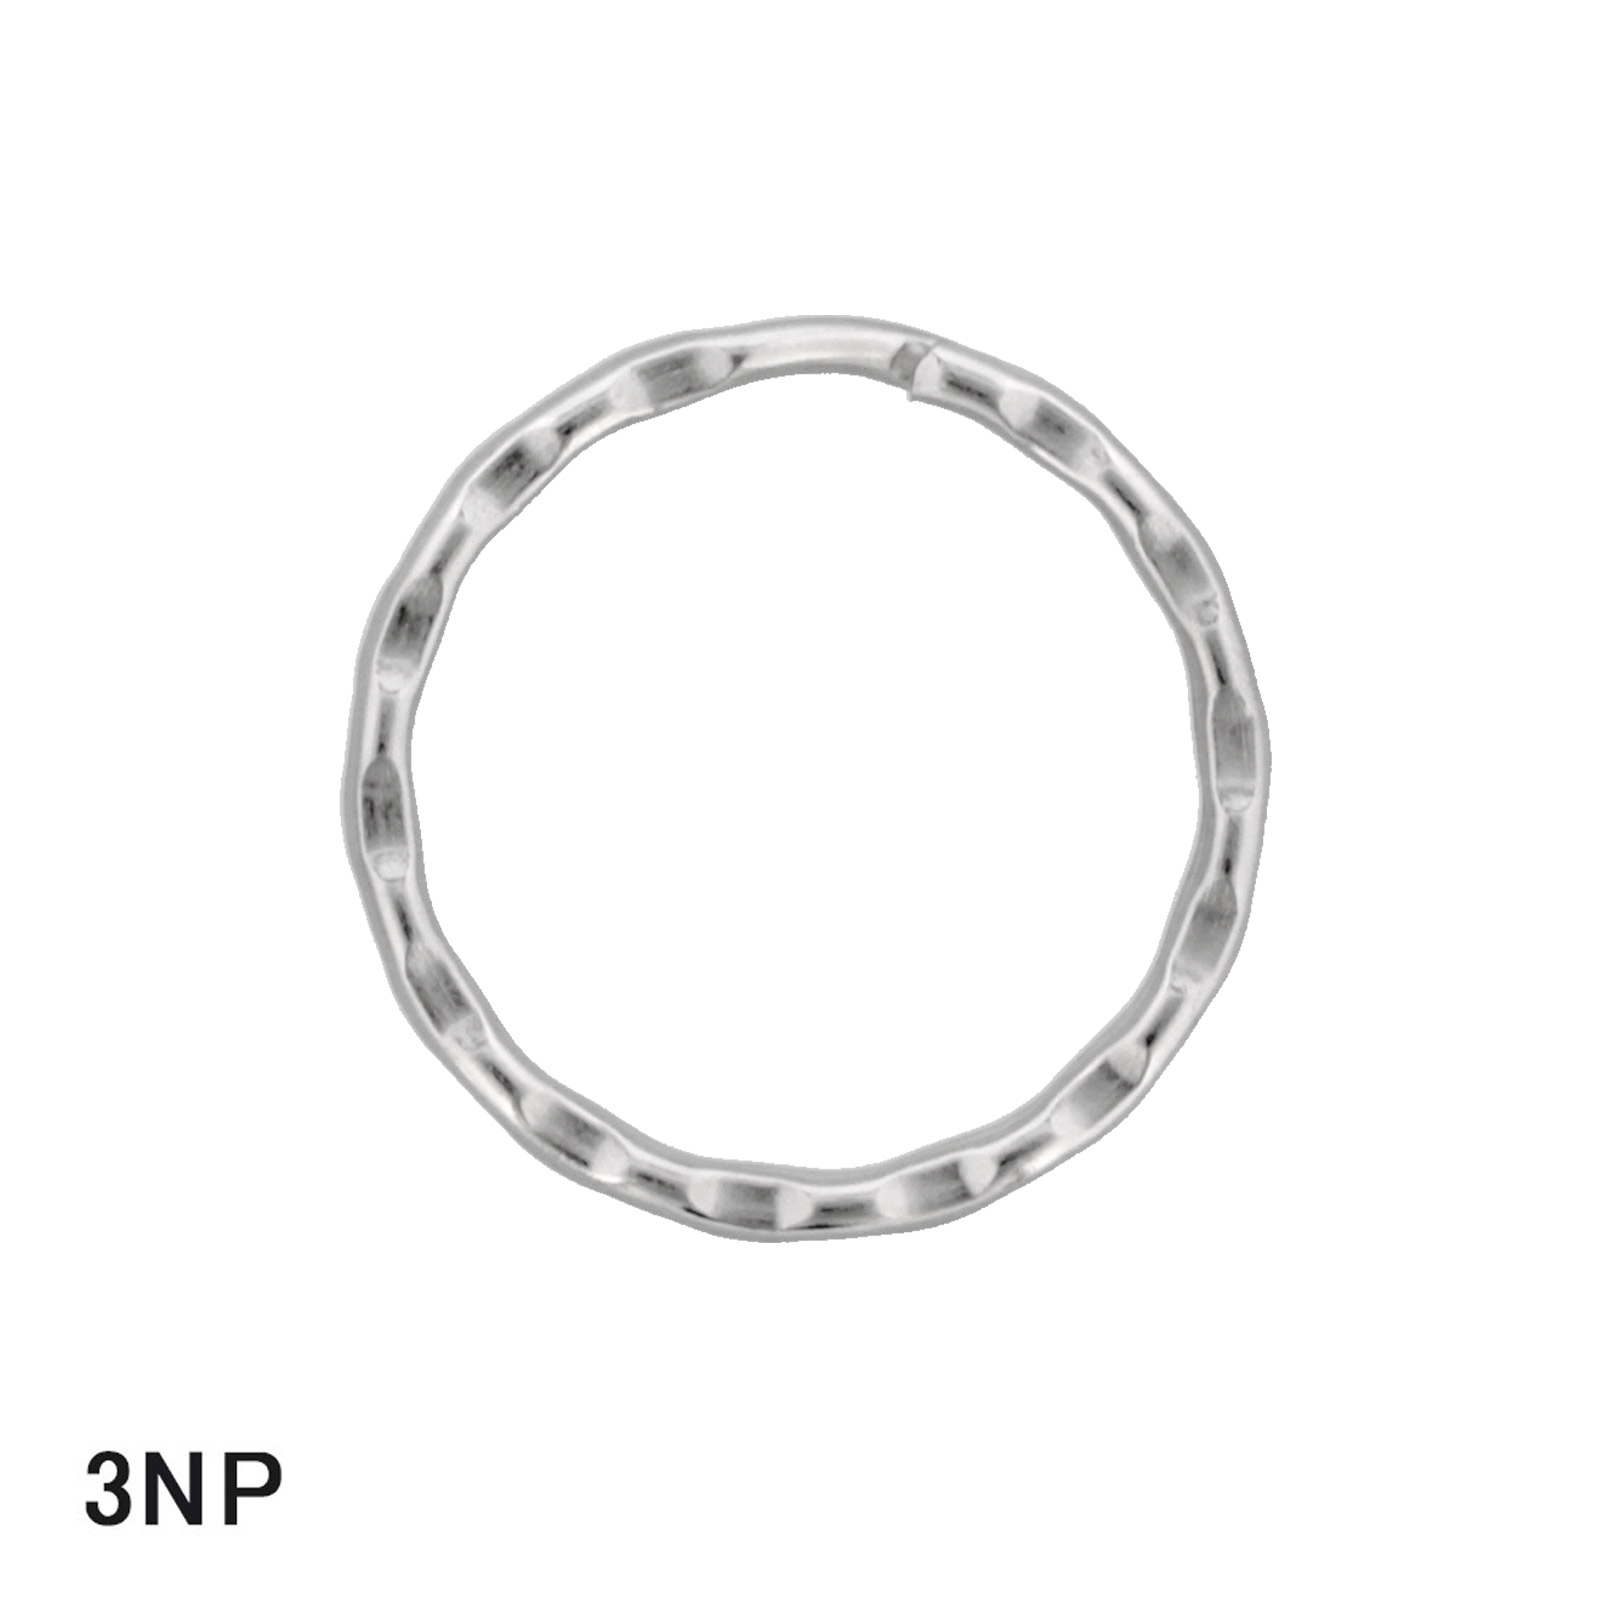 Double ring with press pattern